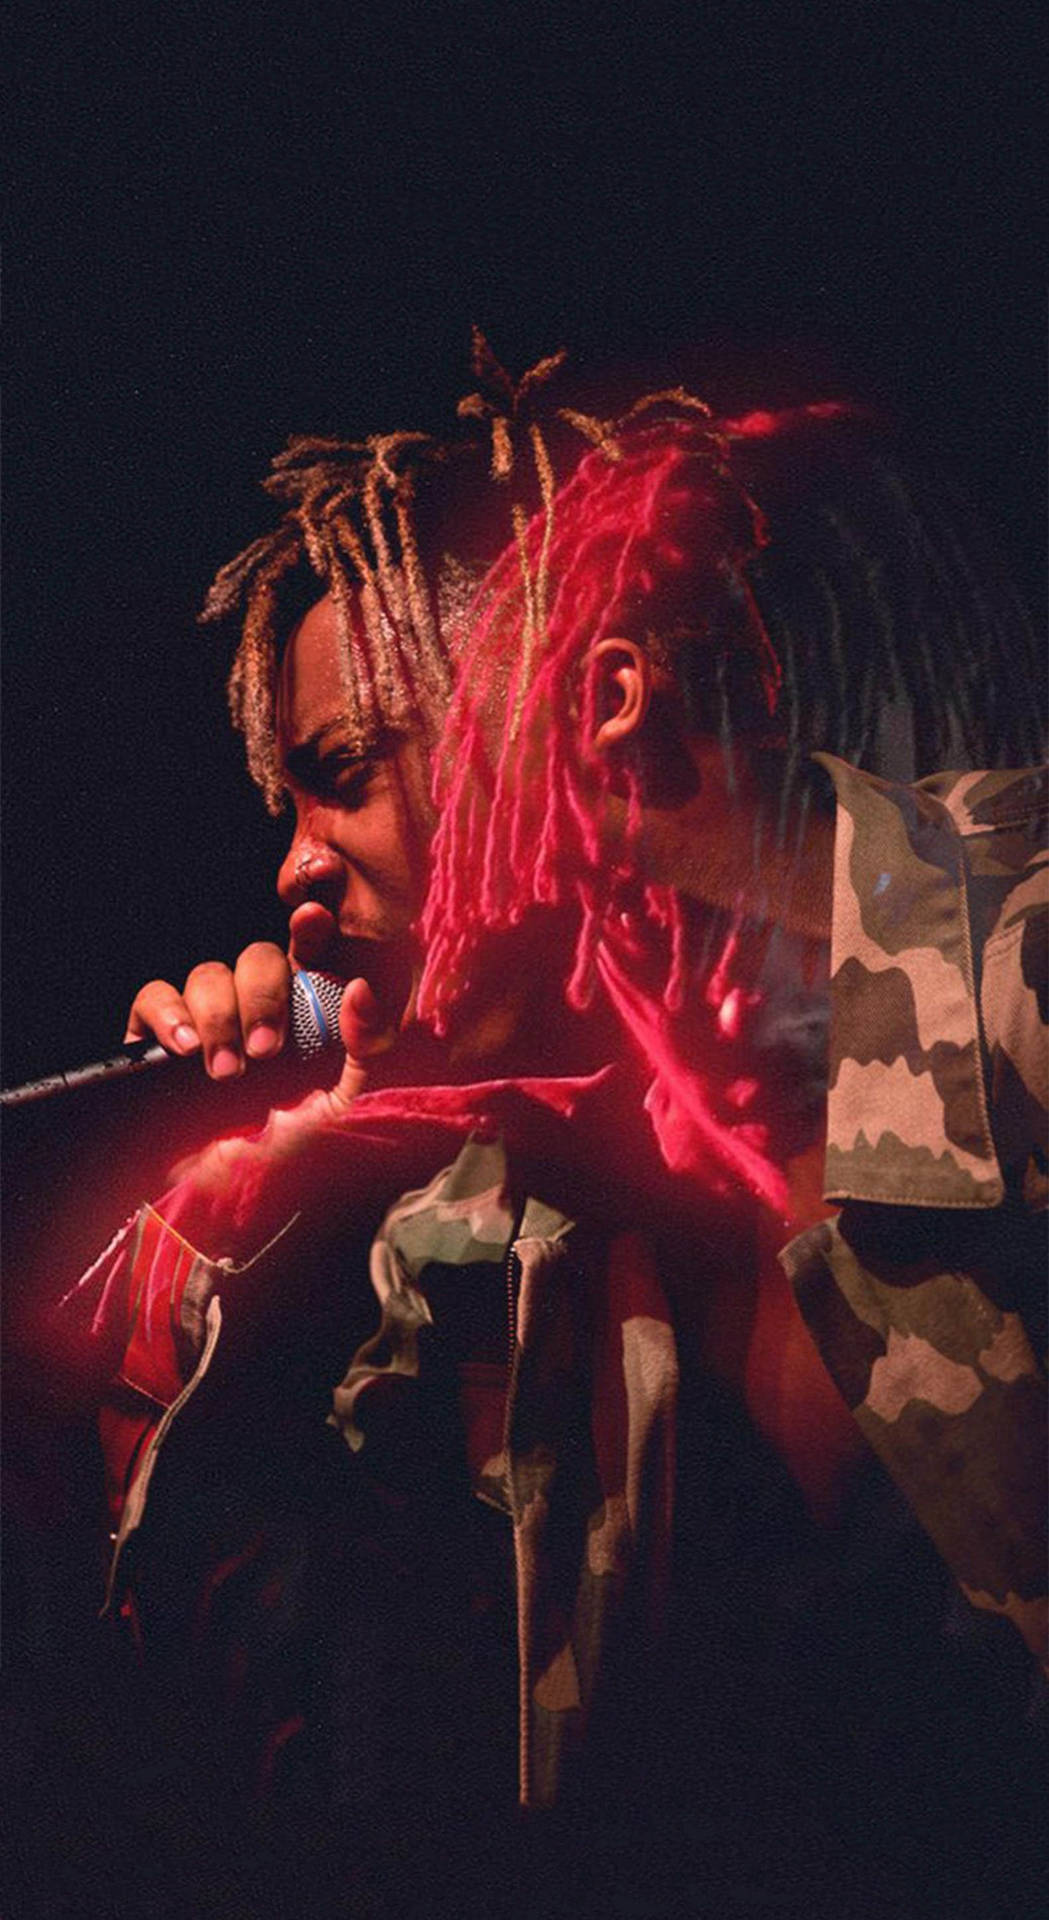 “follow Your Own Path And Create Your Own Aesthetic.” - Juice Wrld